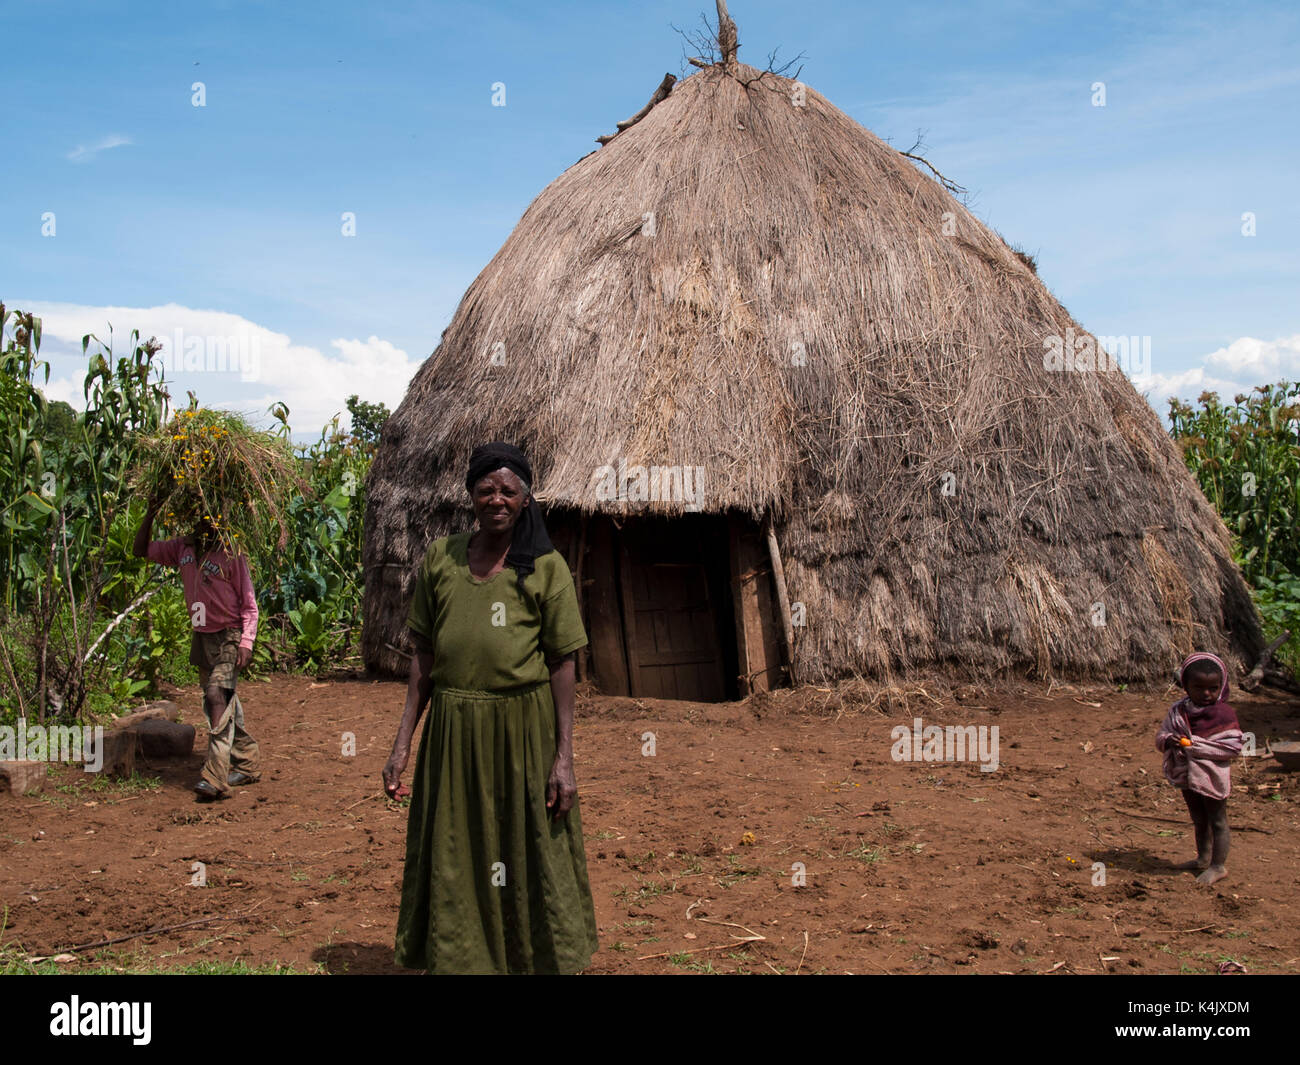 A traditional thatched mud hut, Ethiopia, Africa Stock Photo